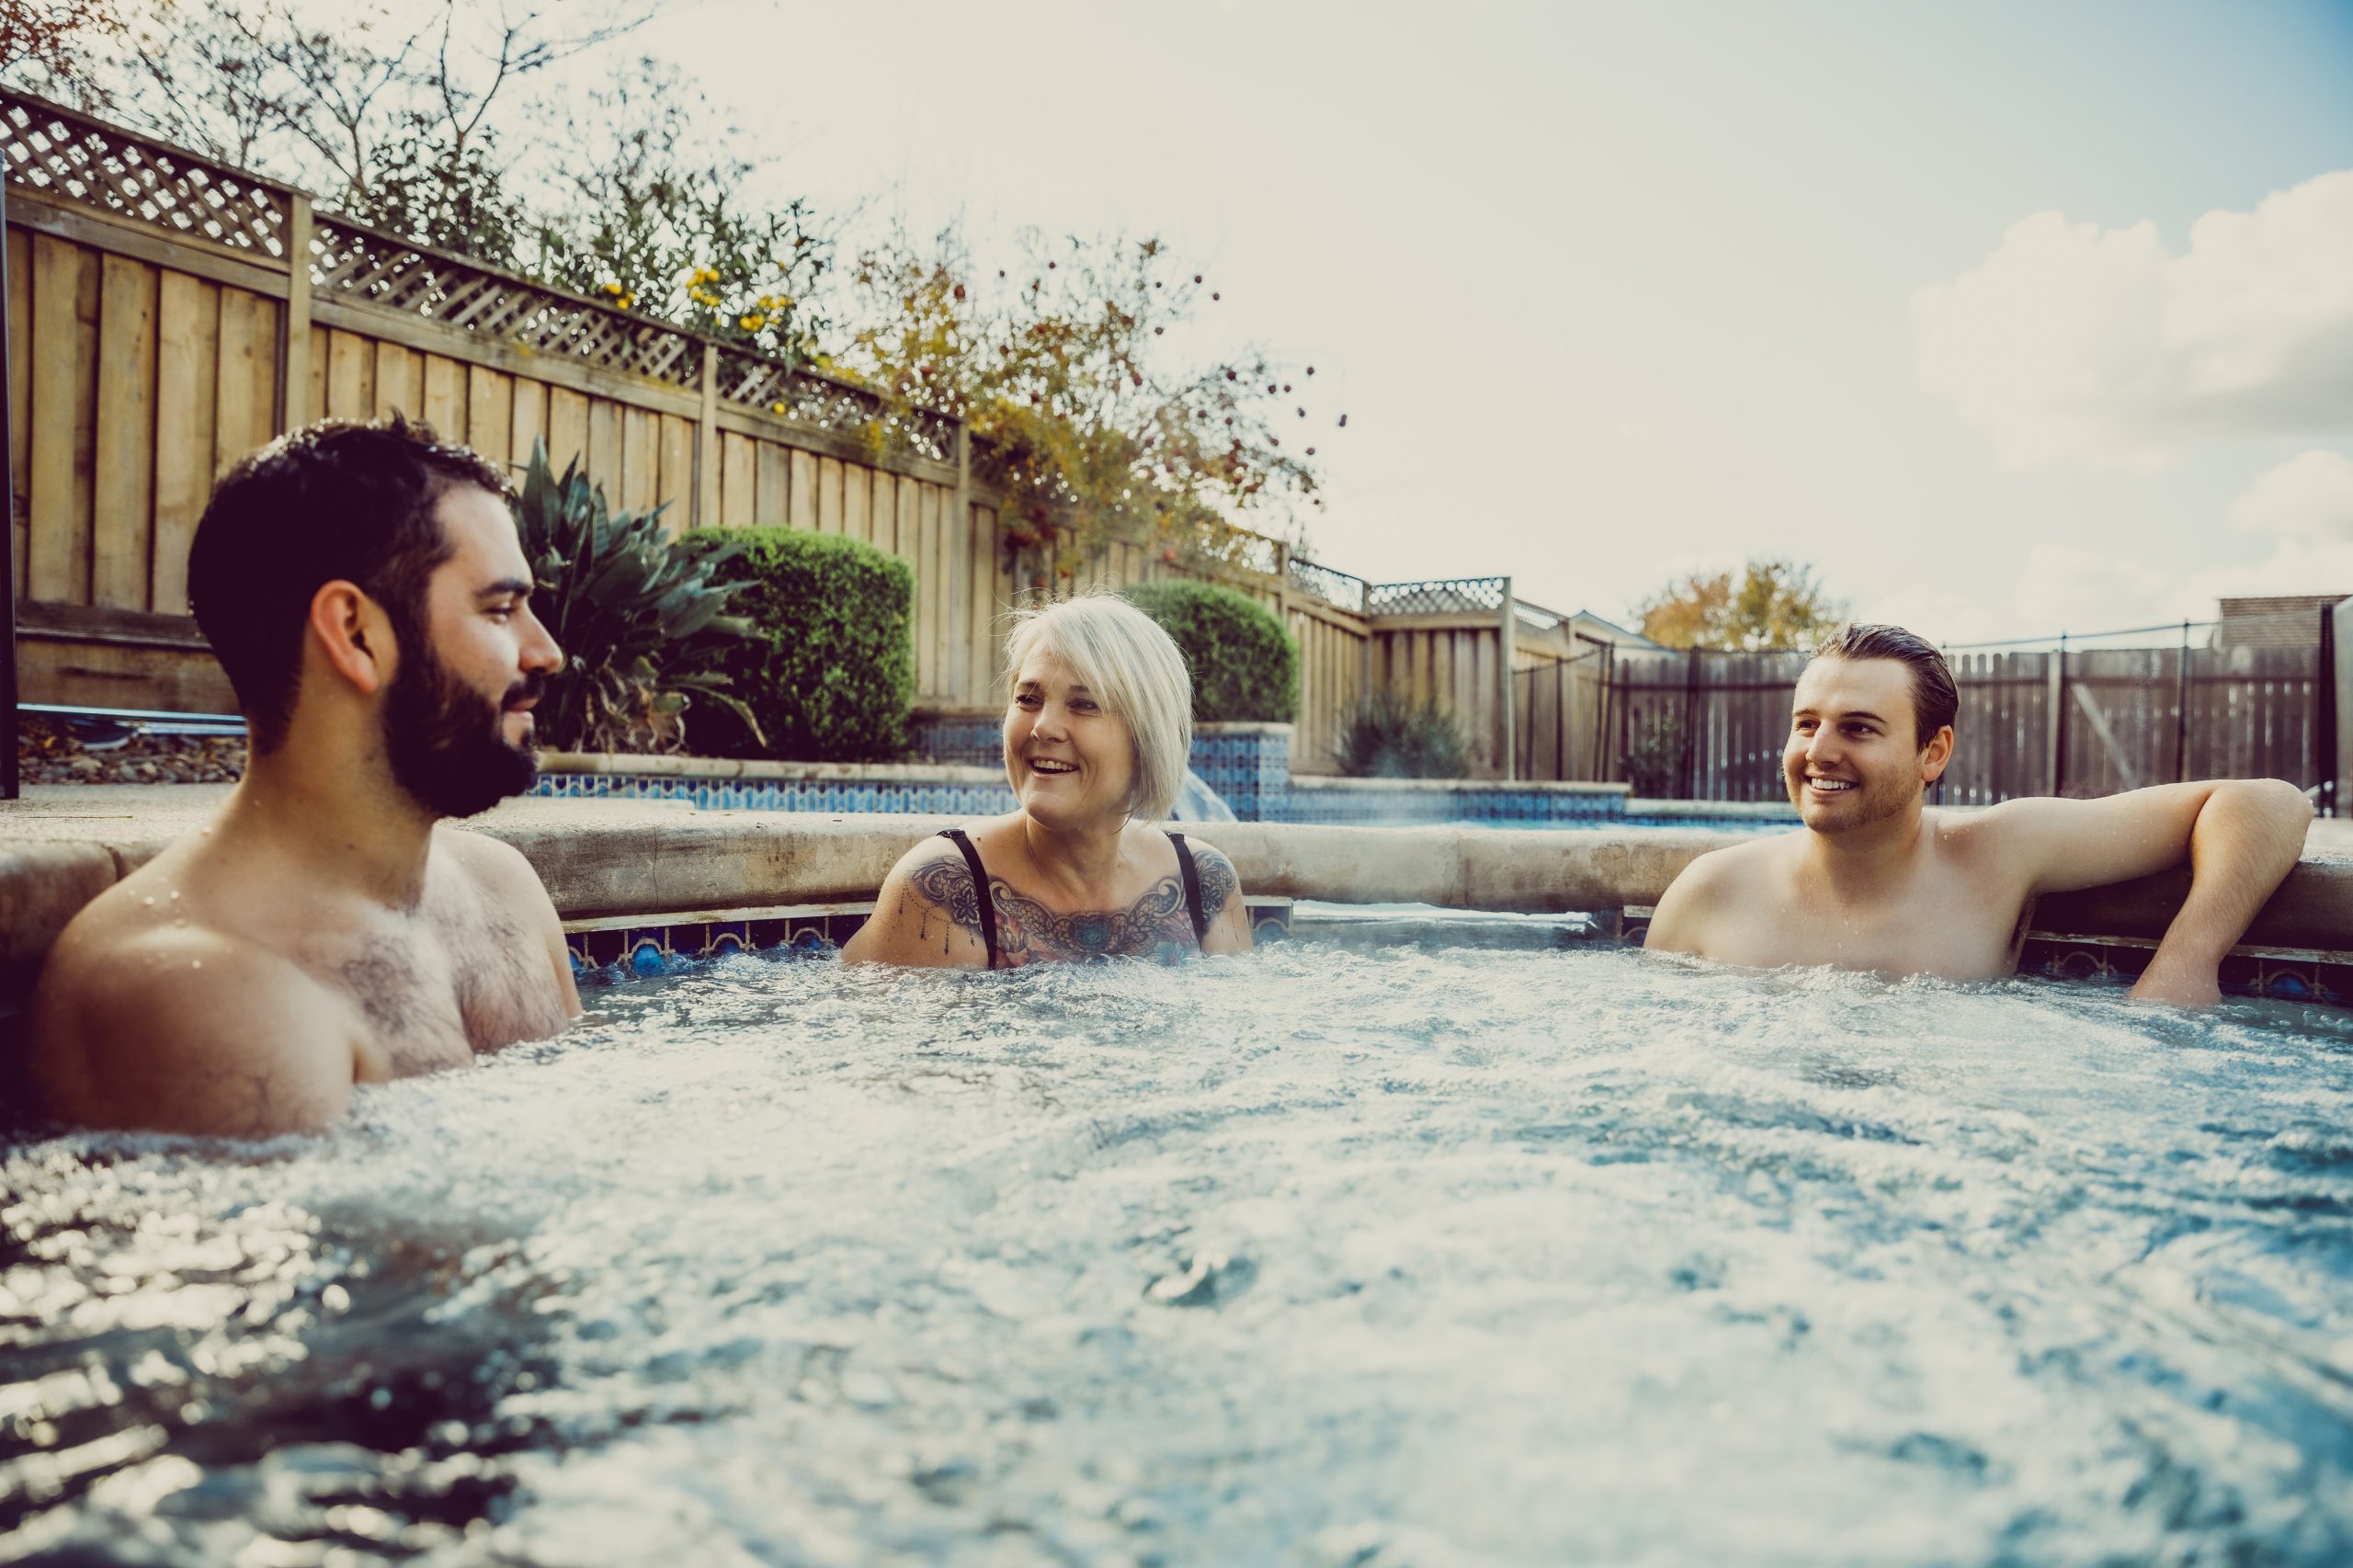 Three people talking and smiling in a hot tub